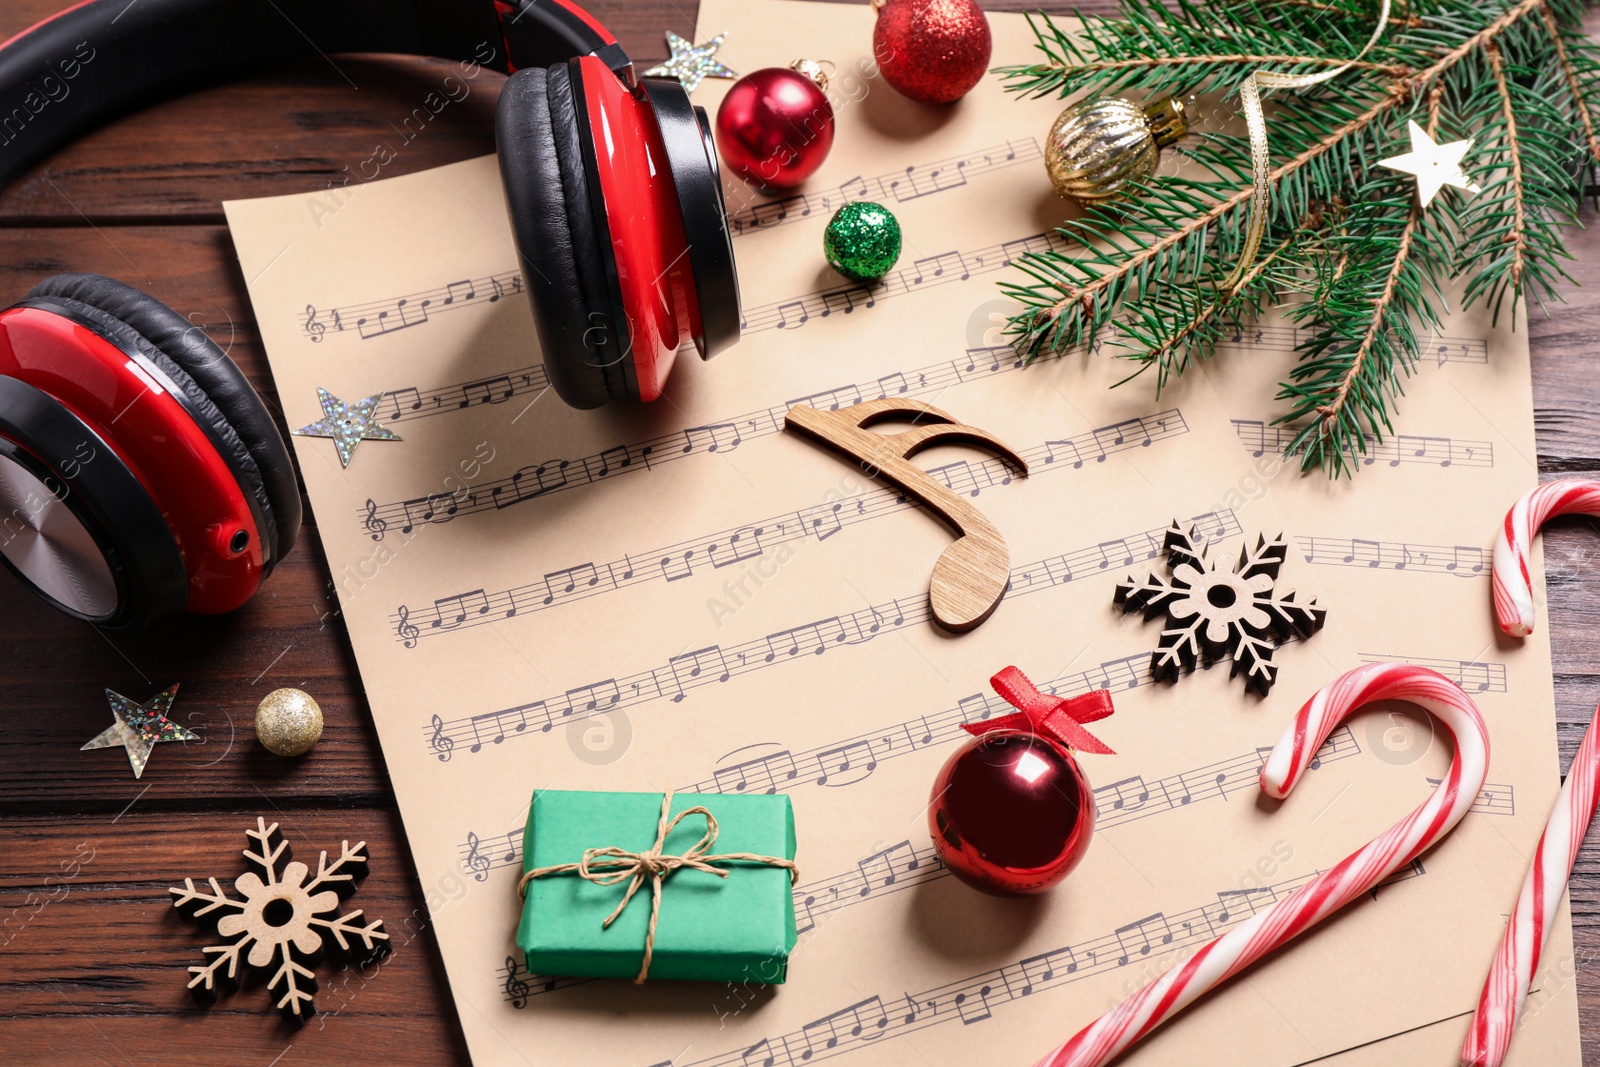 Photo of Christmas decorations, headphones and music sheets on wooden table